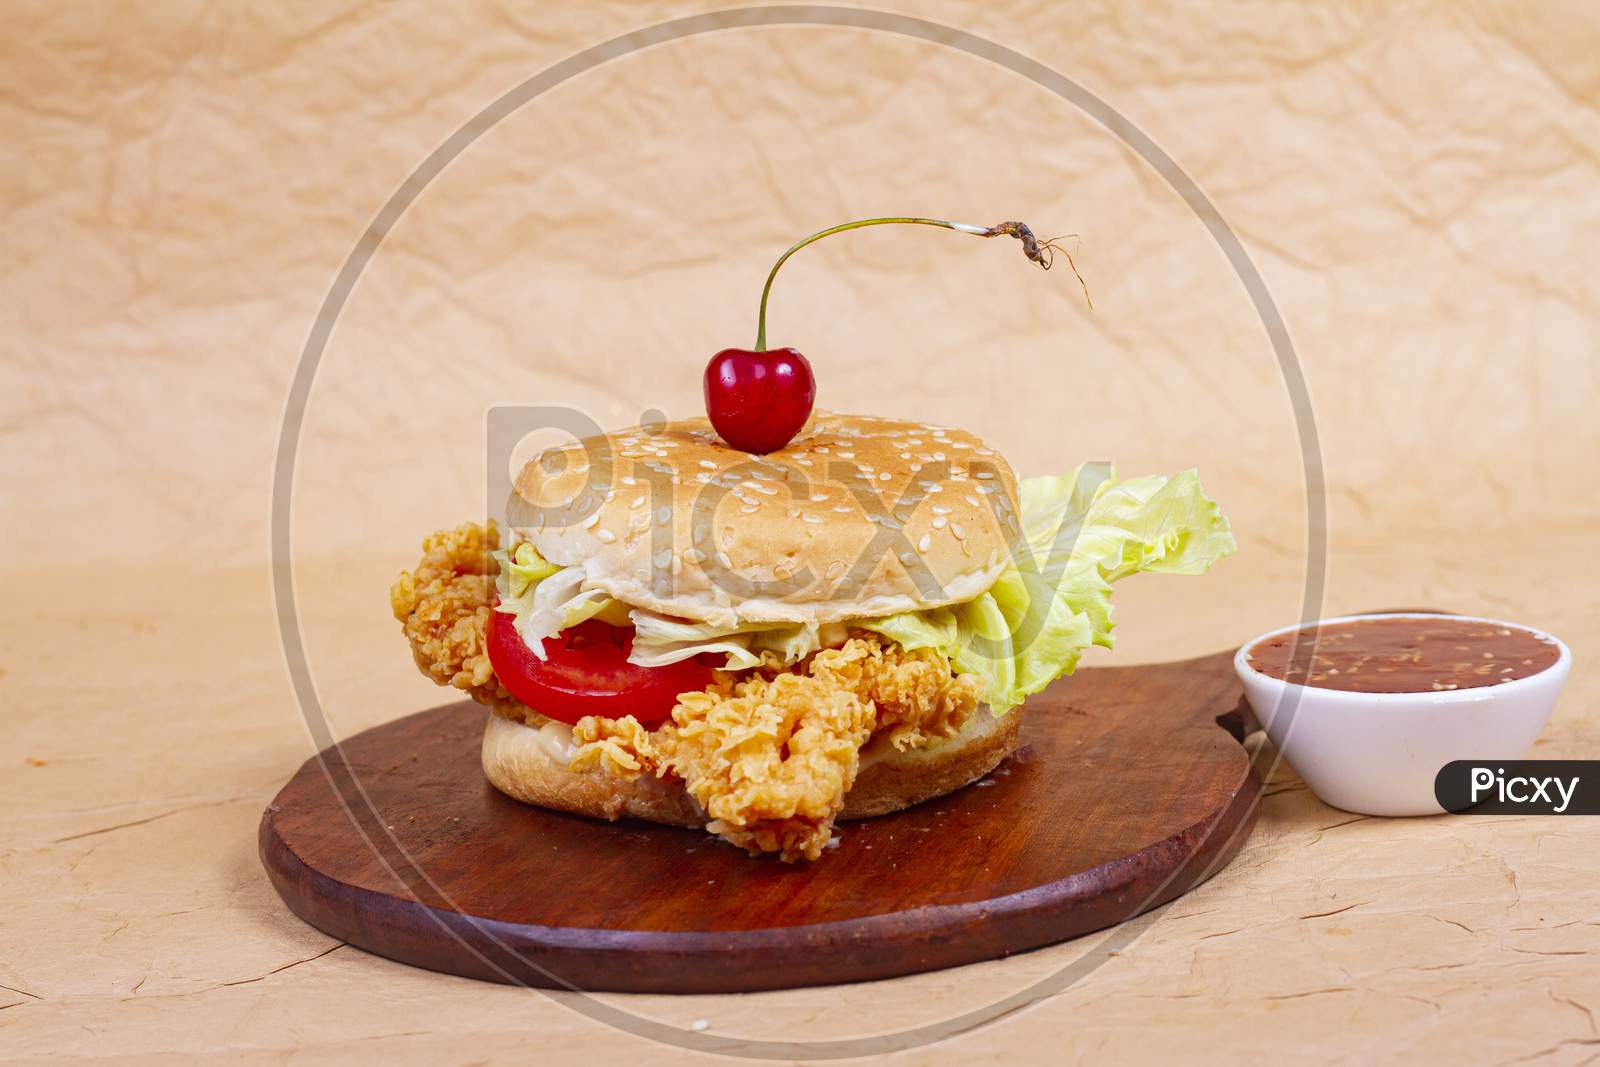 Juicy Fish Burger, Hamburger Or Cheeseburger With One Fish Patties, With Sauce. Concept Of American Fast Food. Copy Space